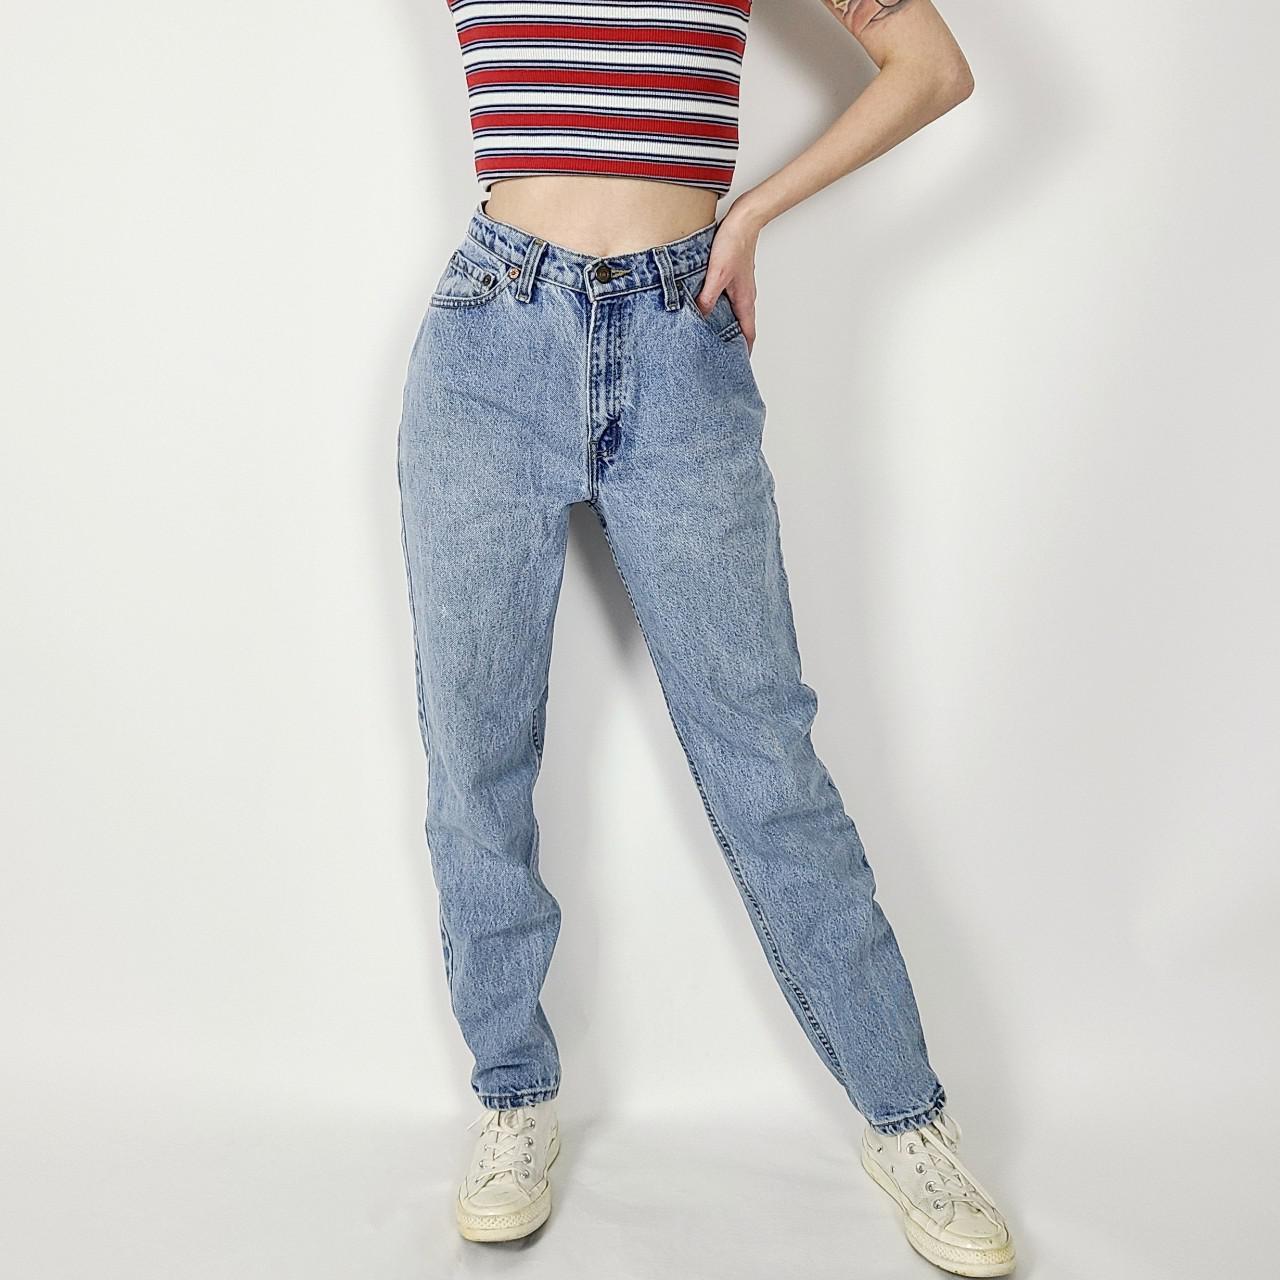 Vintage Levi's Jeans All Sizes High Waisted Jeans -  Canada